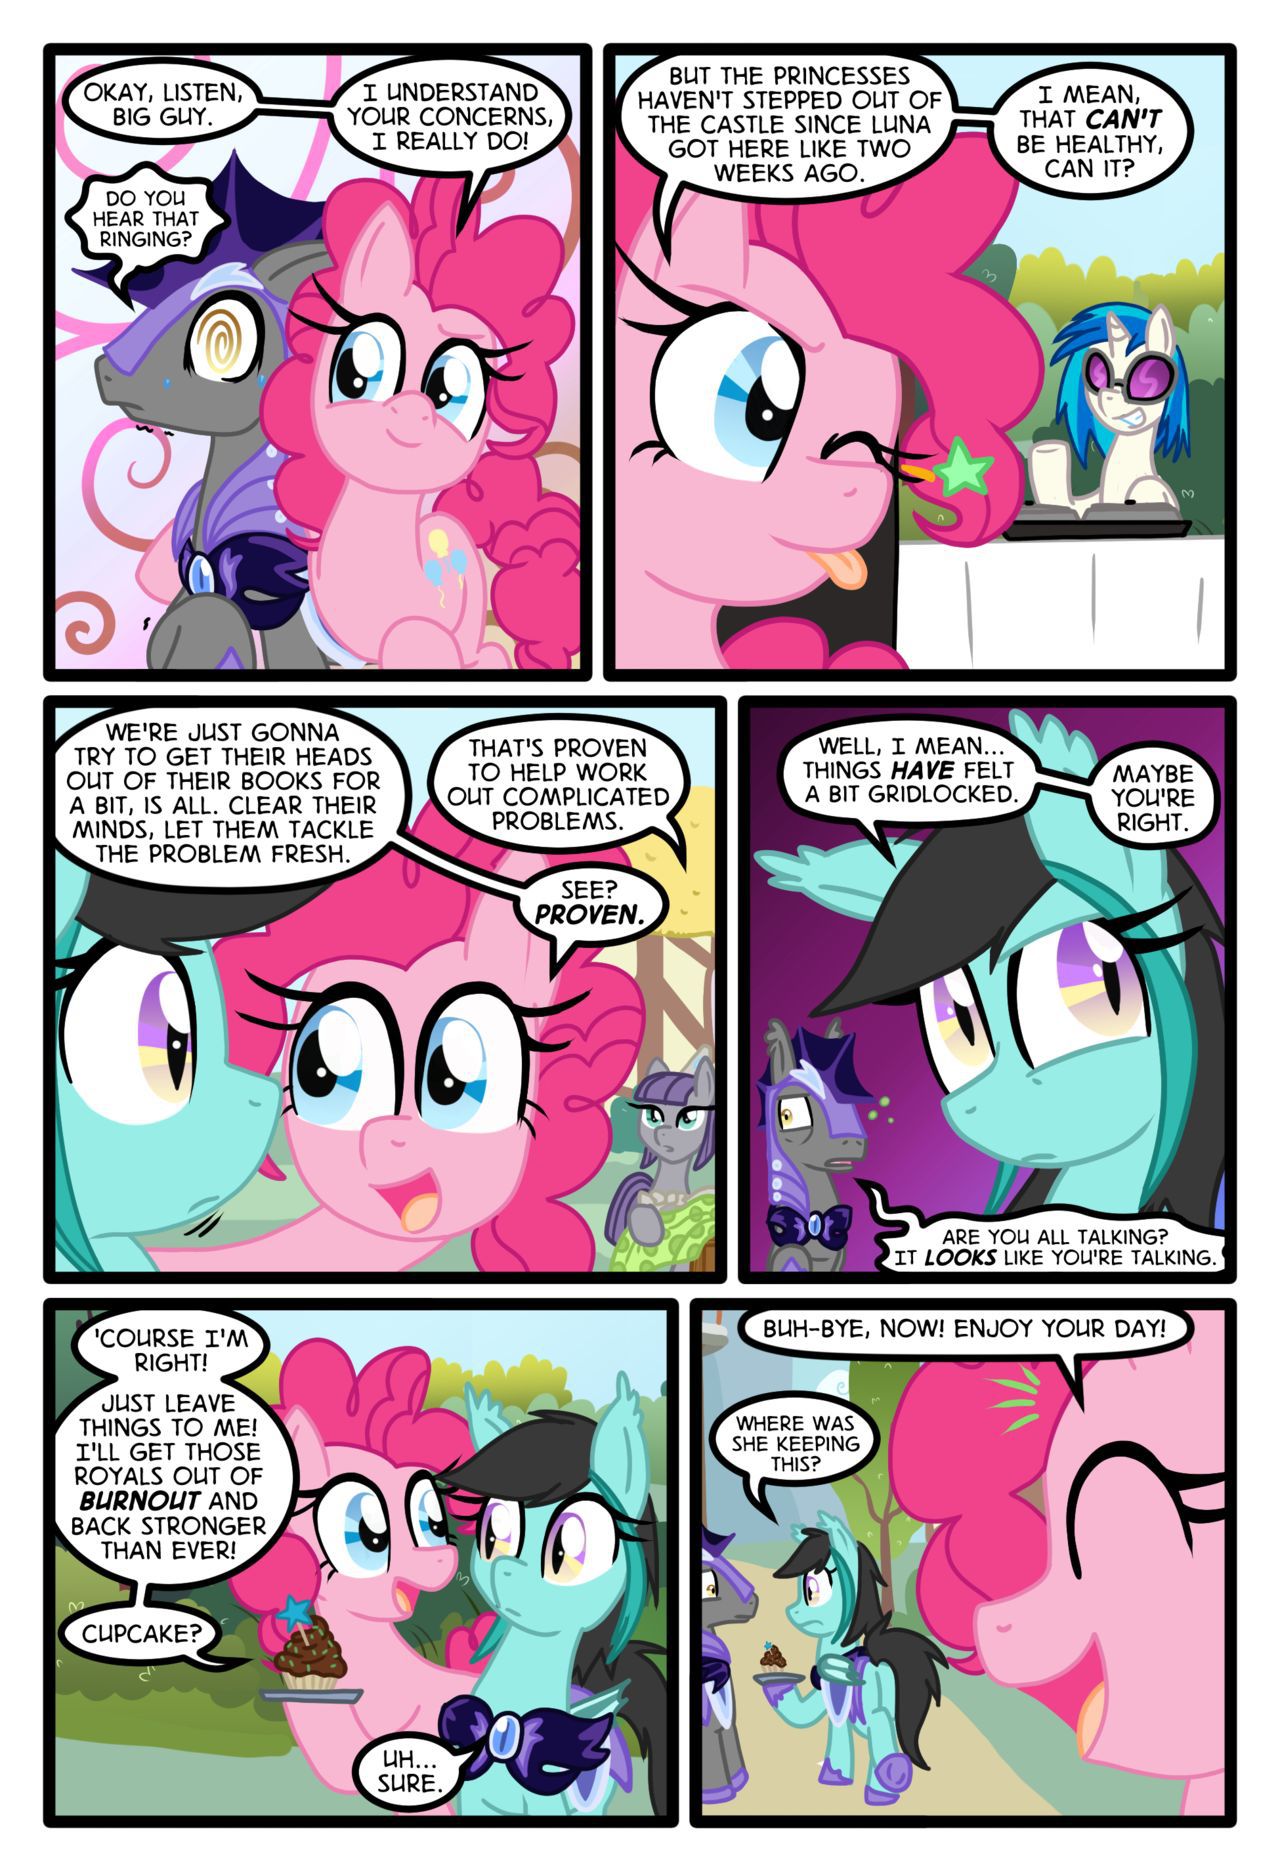 [Zaron] Lonely Hooves (My Little Pony Friendship Is Magic) [Ongoing] 47